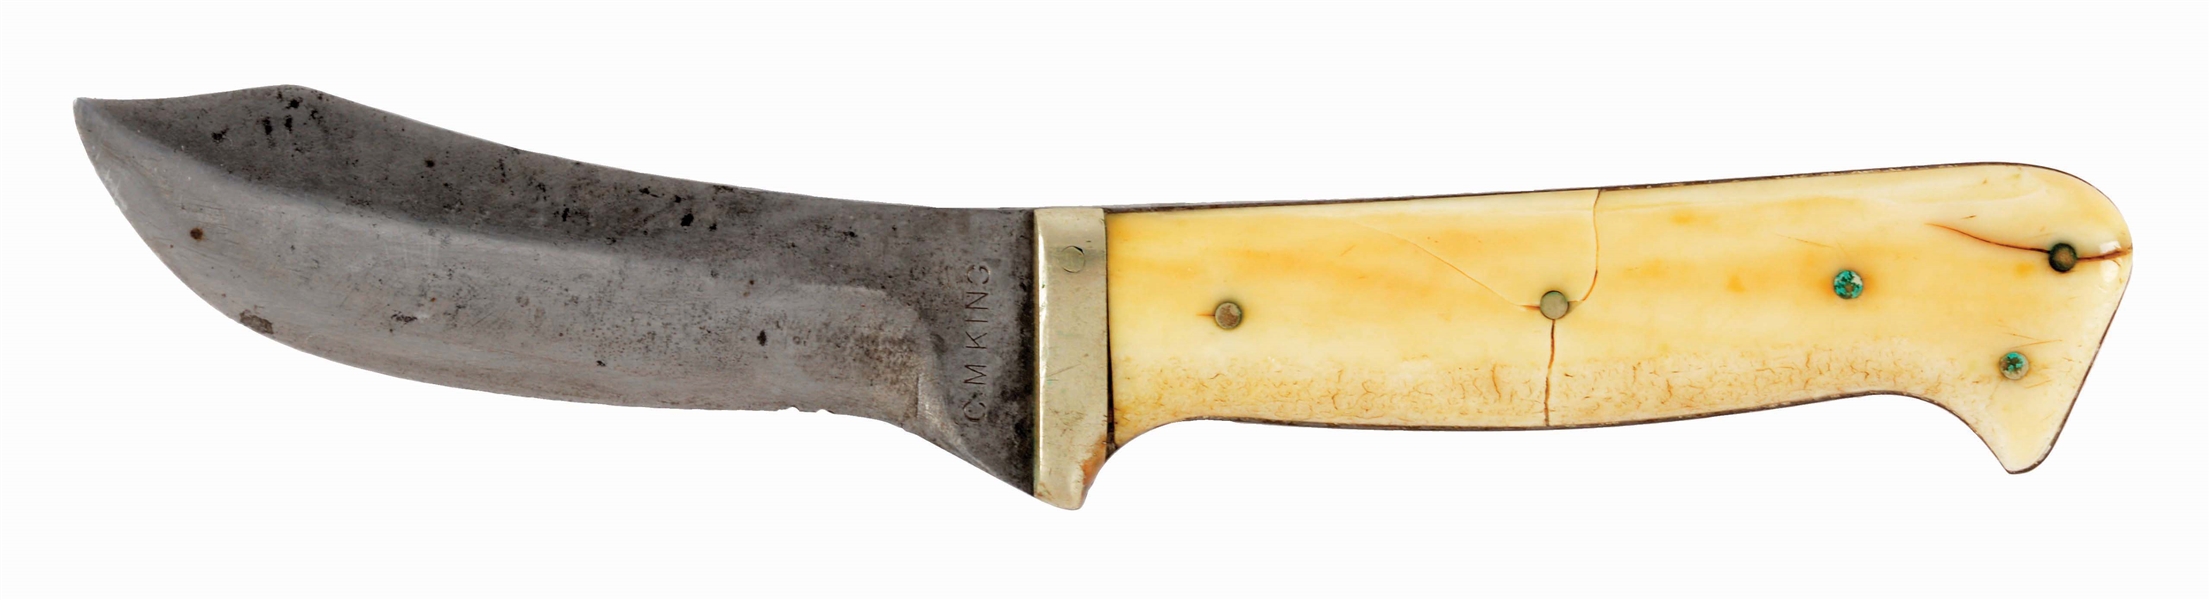 CALIFORNIA STYLE HUNTING KNIFE MARKED "C.M. KING".